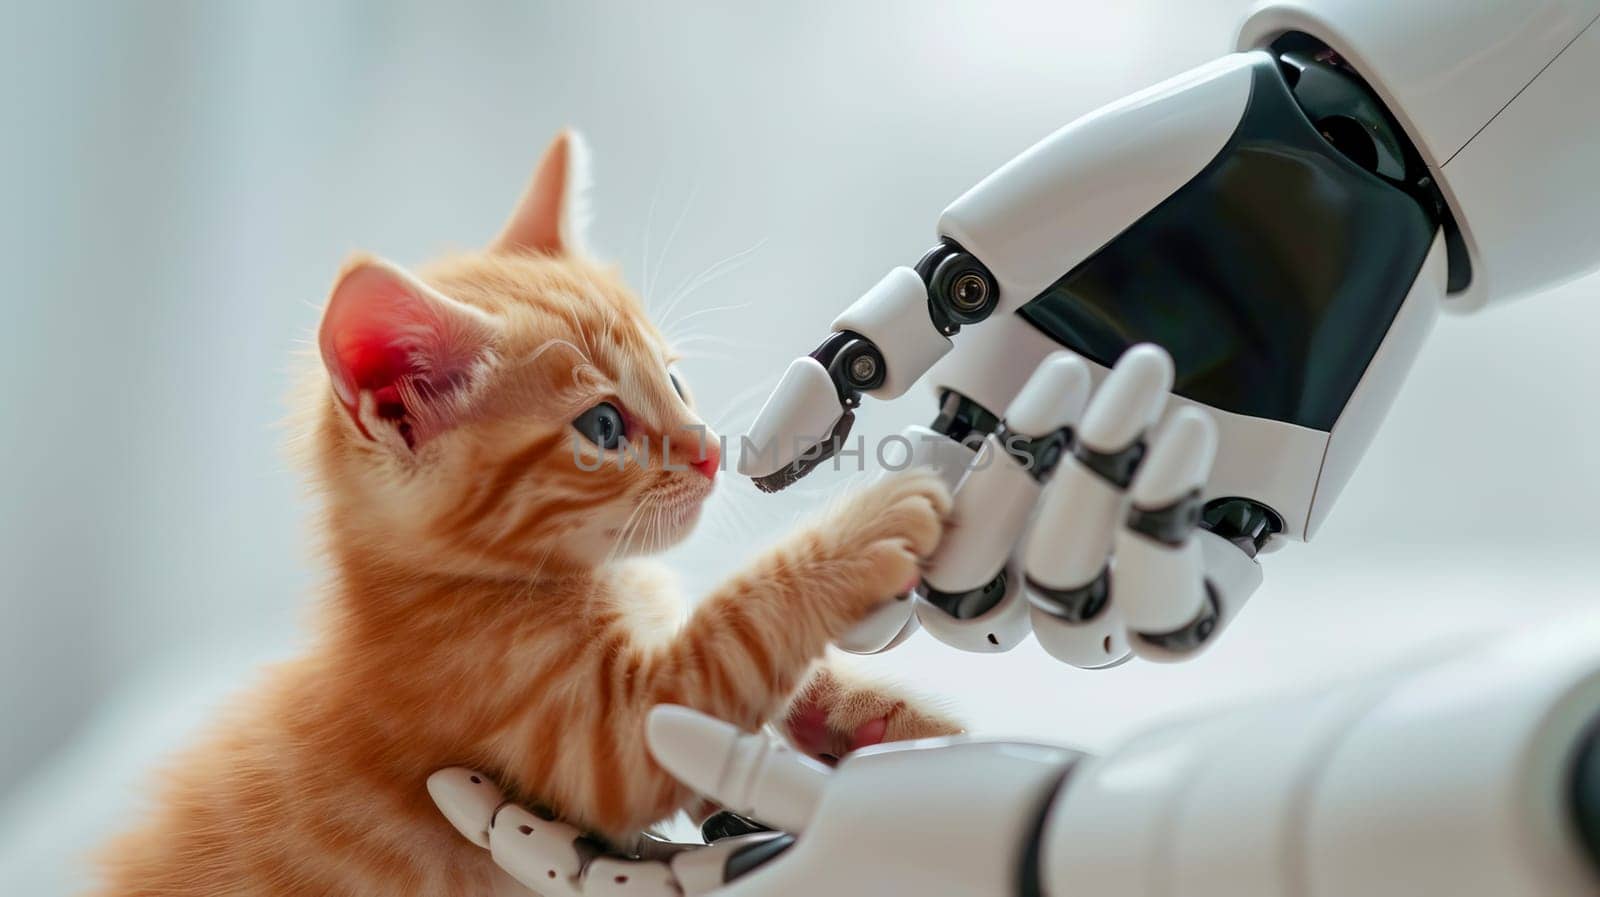 A robot hand gently touches a small ginger kitten with a finger. by OlgaGubskaya